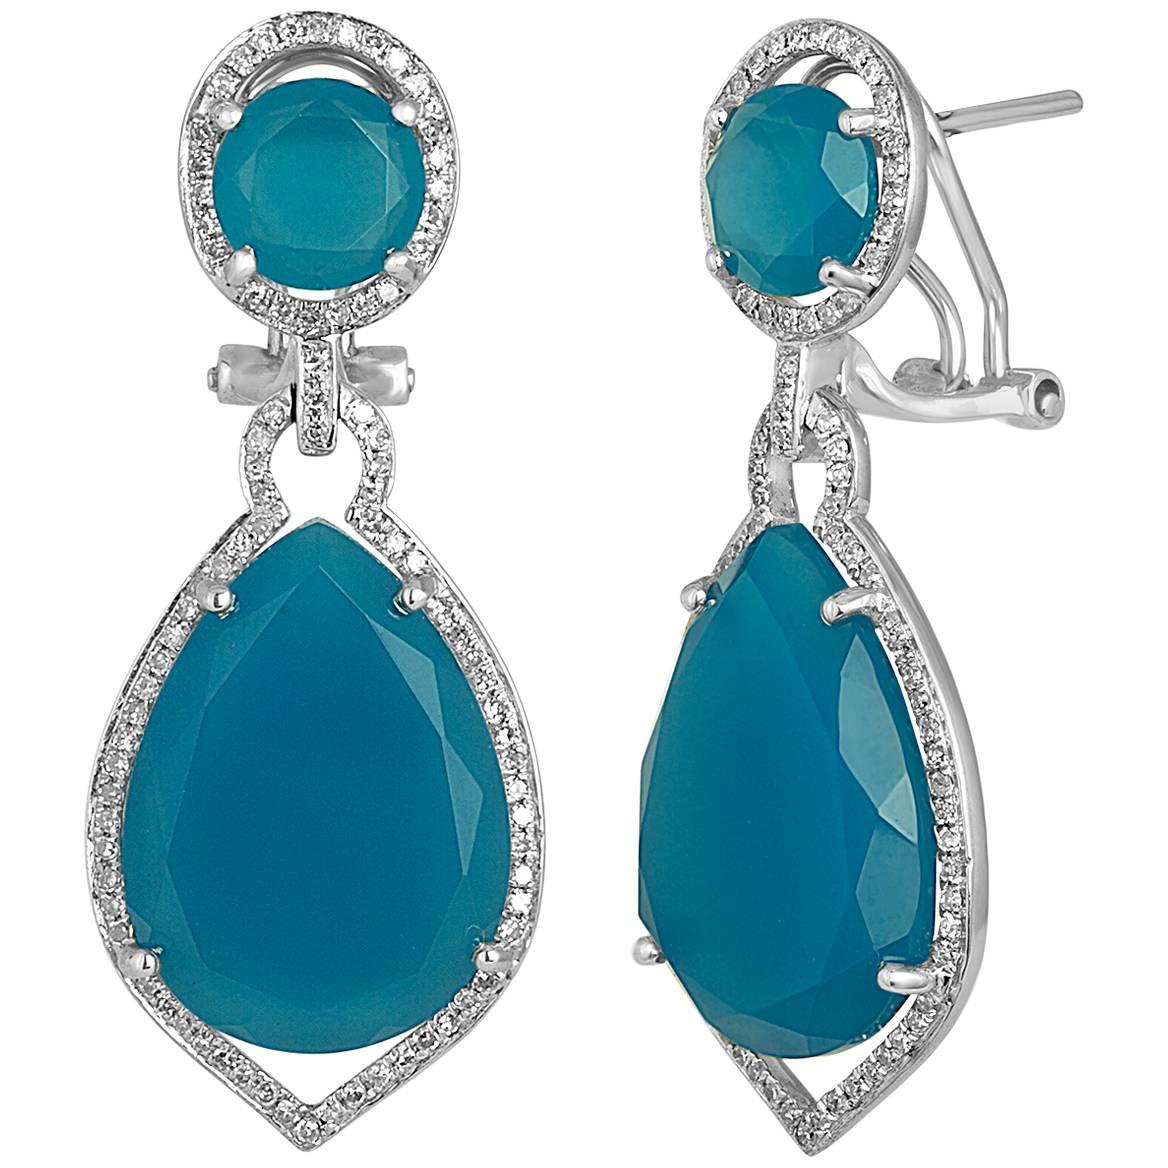 19.21 Carats Blue Agate Diamond Gold Earrings For Sale